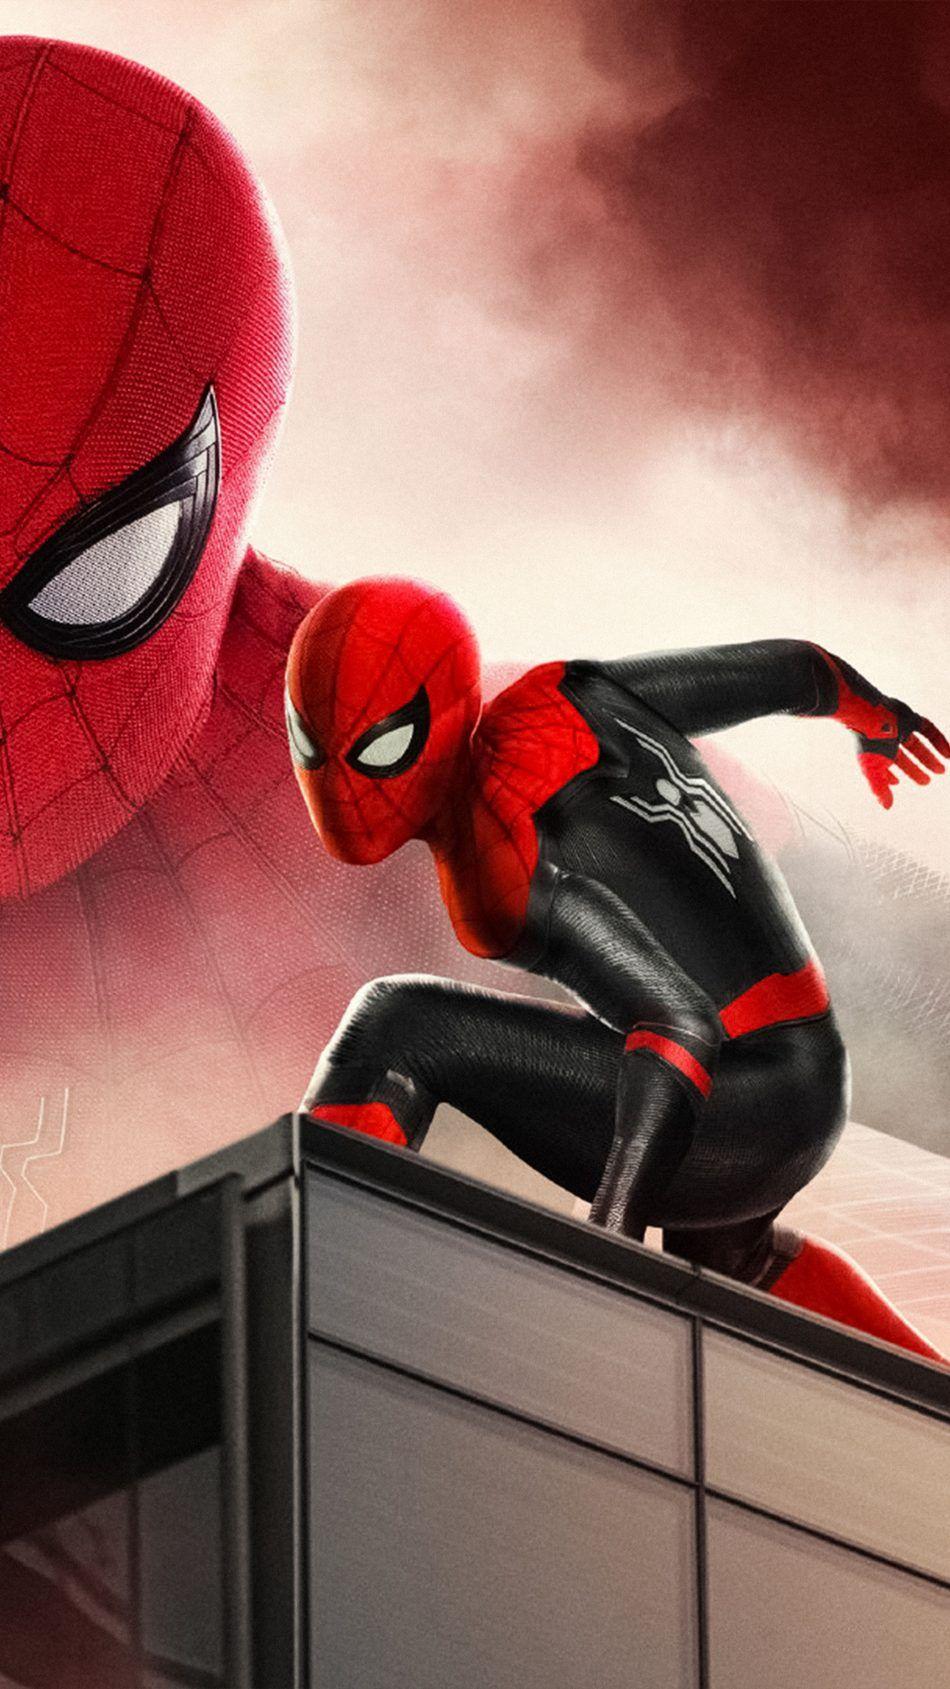 Spider Man Far From Home 2019 Poster 4K Ultra HD Mobile Wallpaper. Spiderman Picture, Spiderman, Marvel Comics Wallpaper